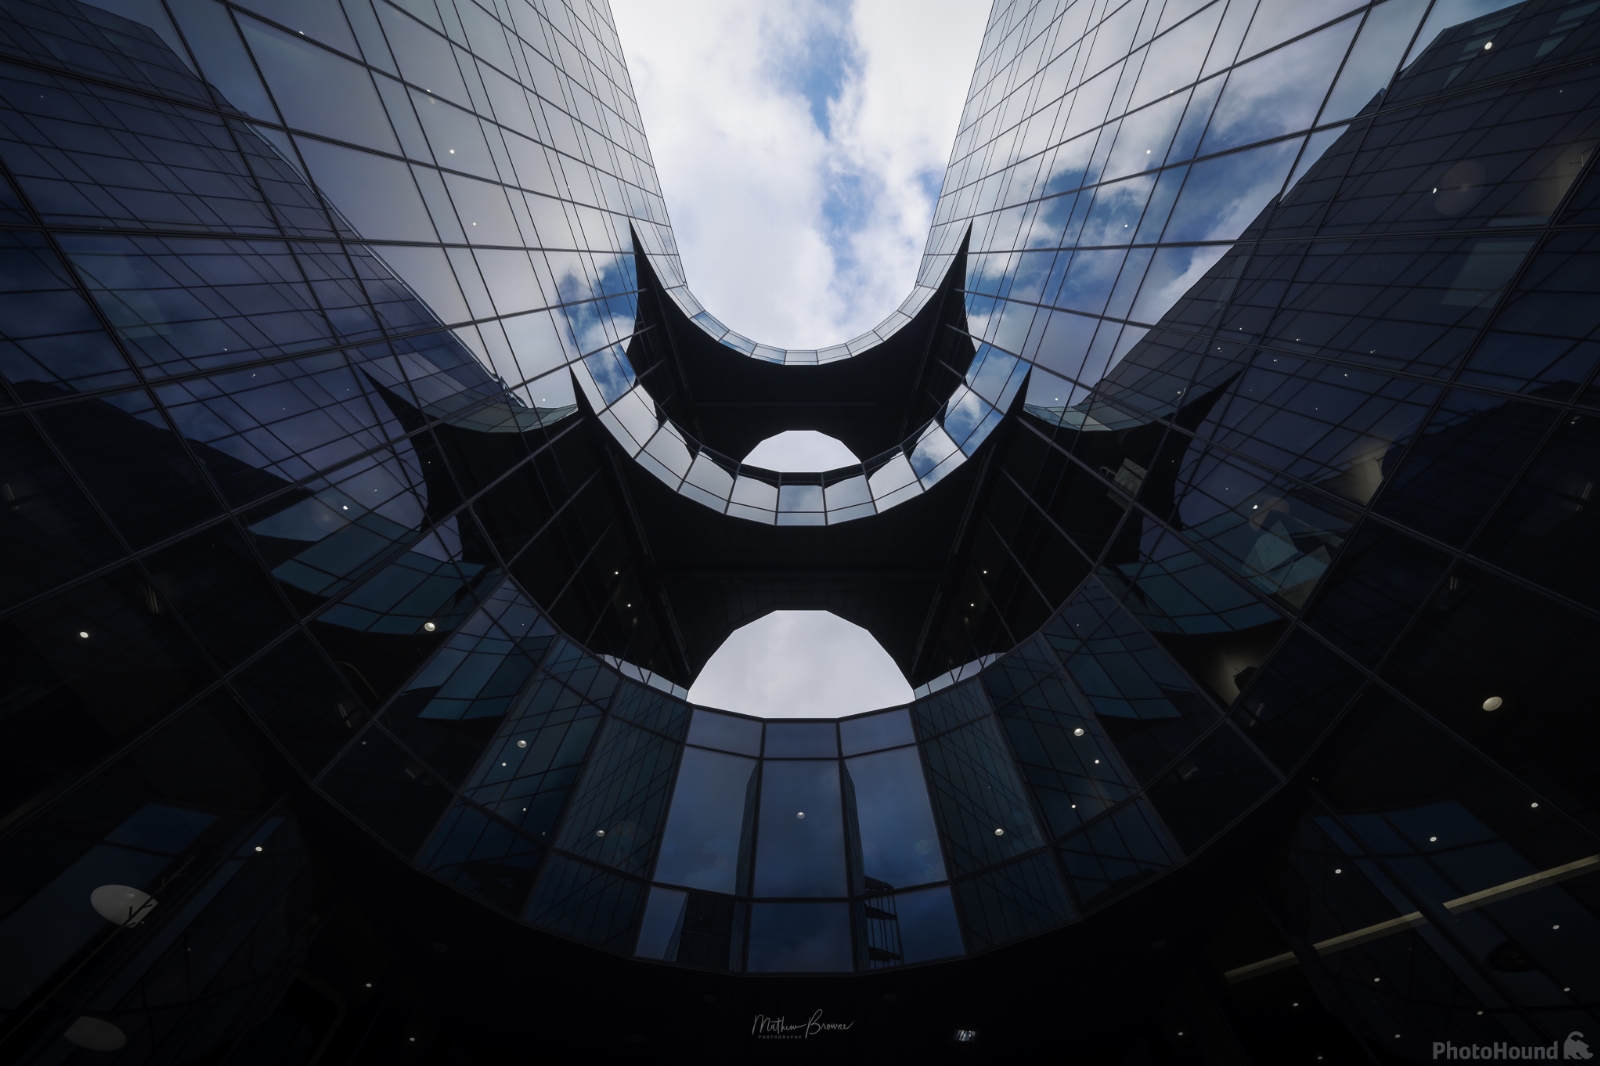 Image of The Batman Building by Mathew Browne